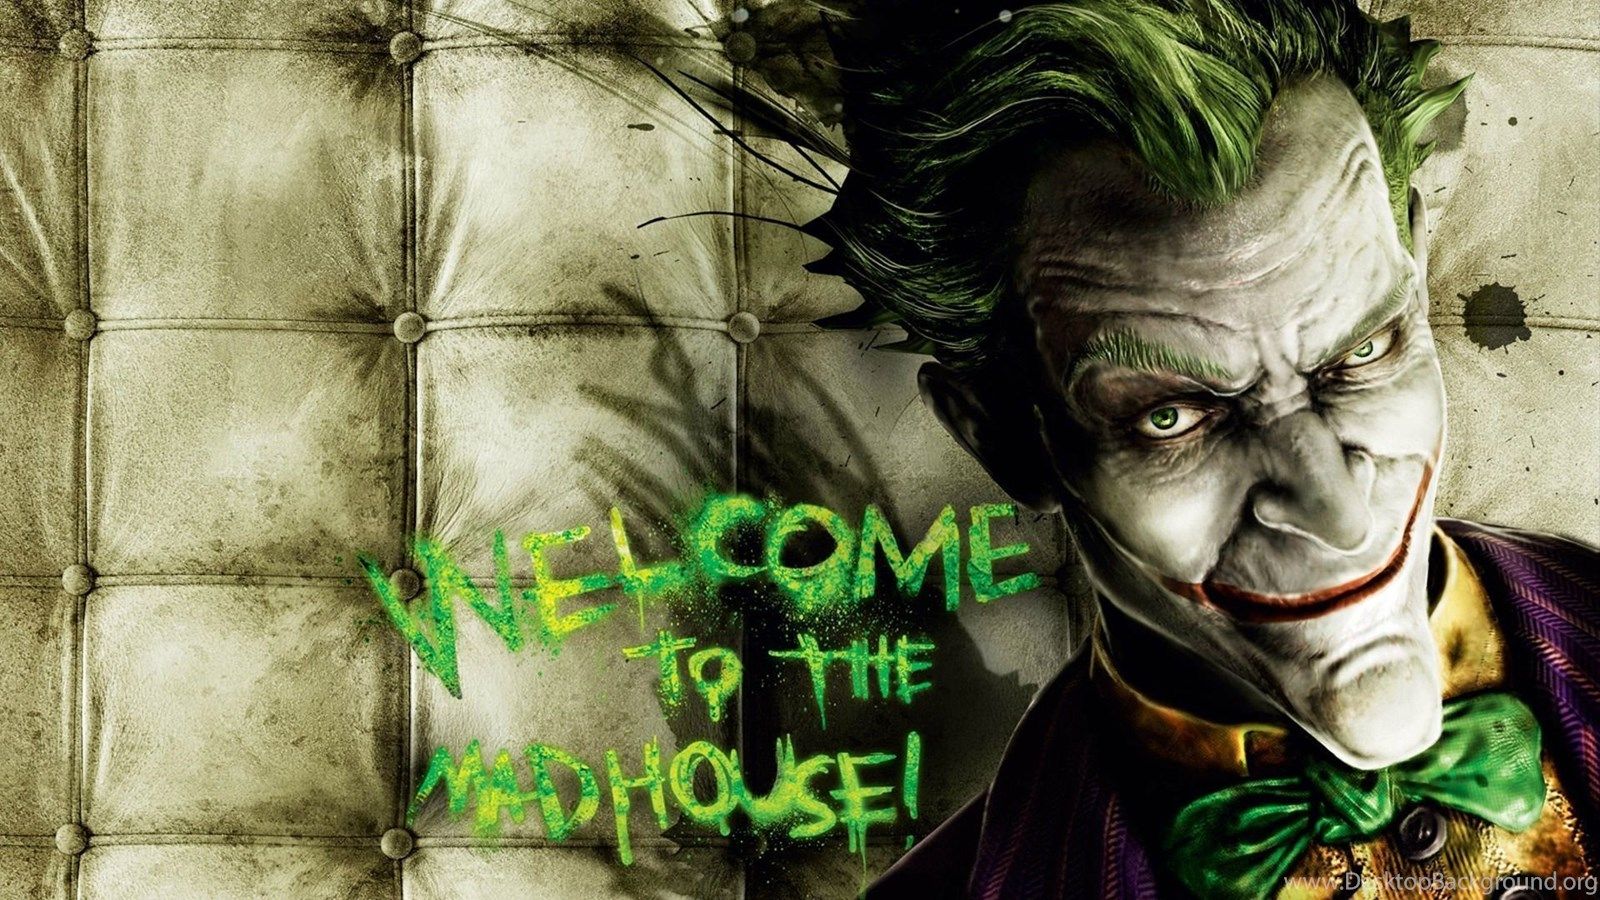 Evil Joker Face Characters Smile Hd Wallpapers For Mobile Phones And  Laptops : Wallpapers13.com